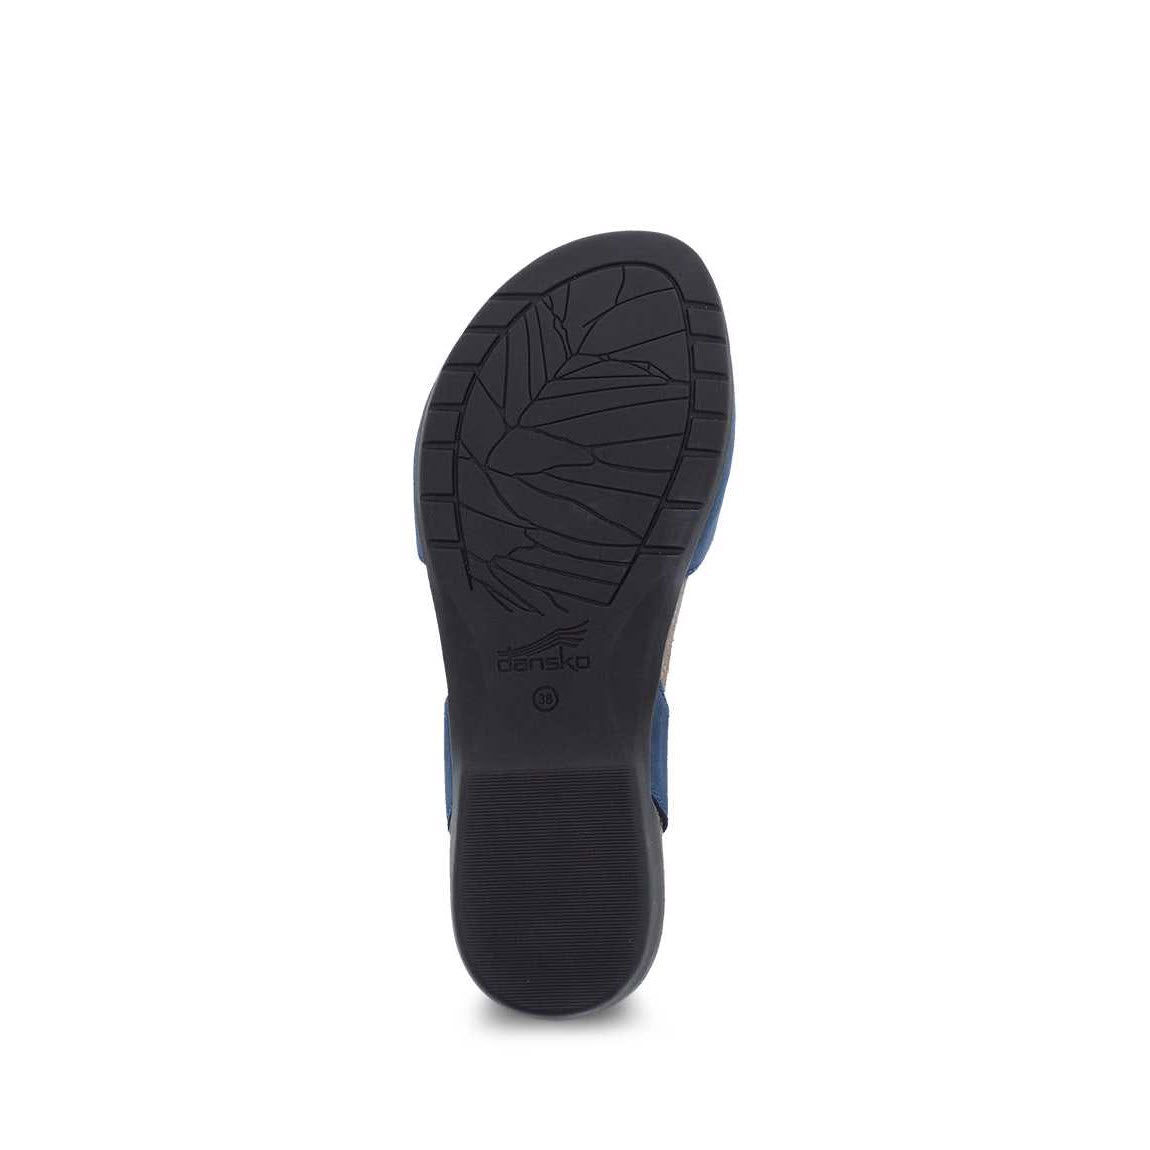 Bottom view of a Dansko Rowan Navy - Womens shoe sole featuring a textured rubber outsole and a blue accent, isolated on a white background.